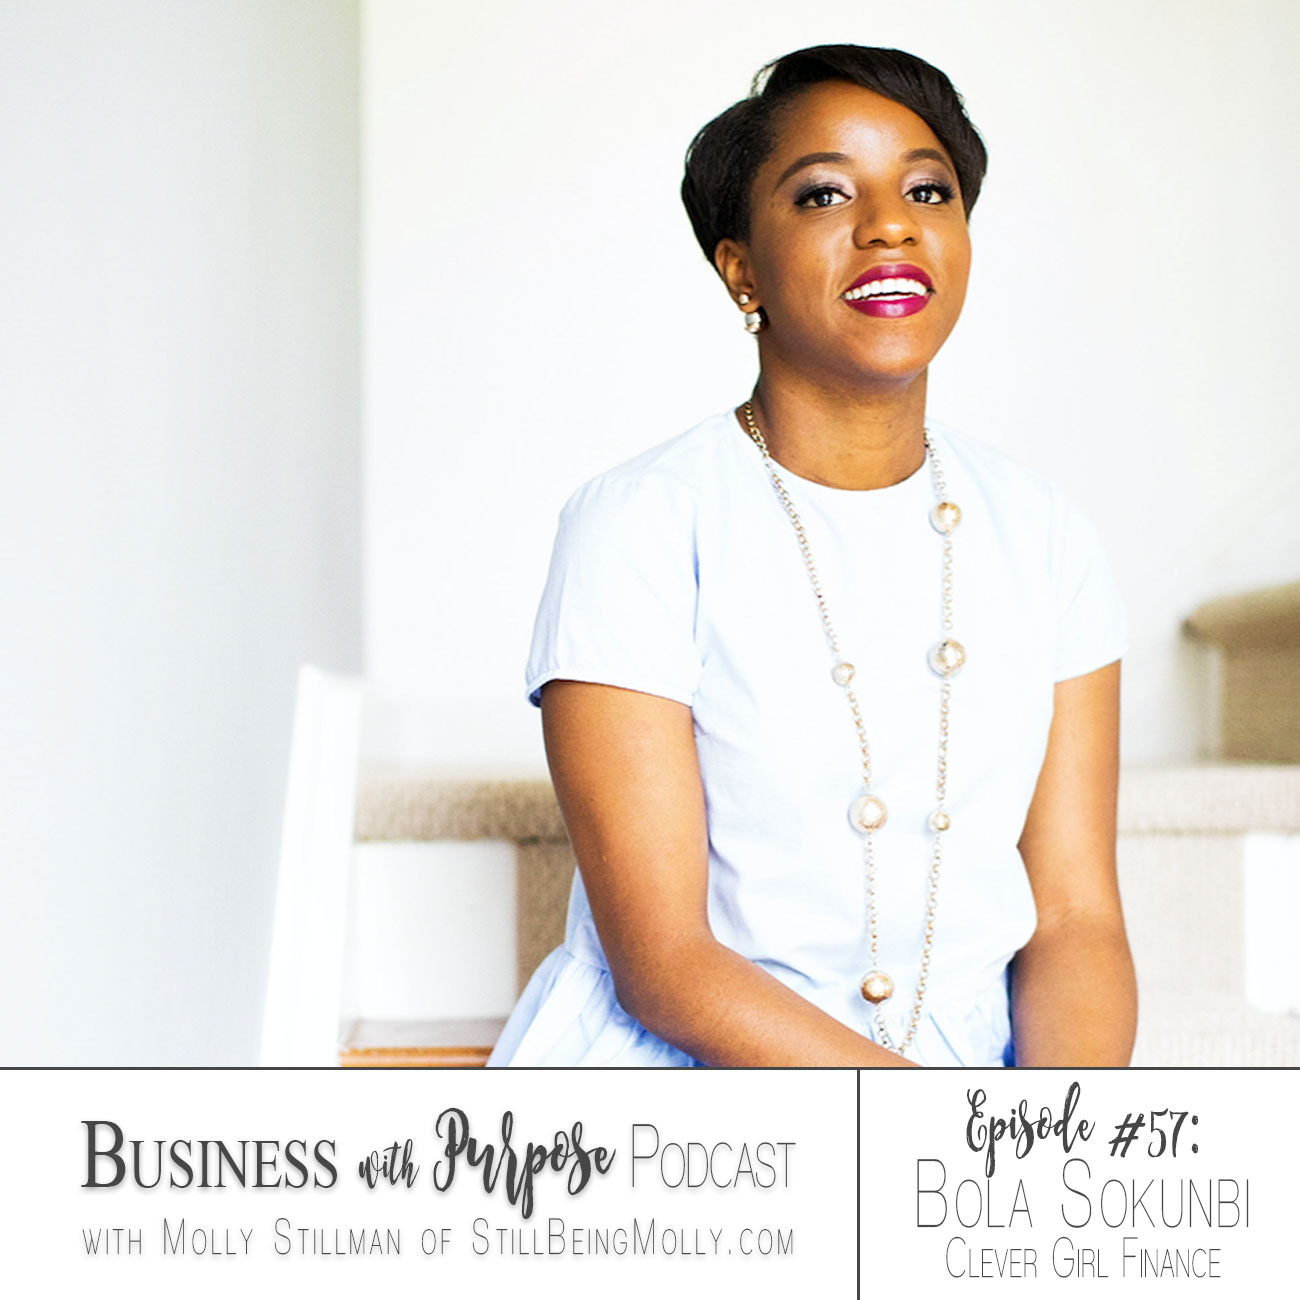 Business Podcast EP 57: Bola Sokunbi, Clever Girl Finance by North Carolina ethical blogger Still Being Molly